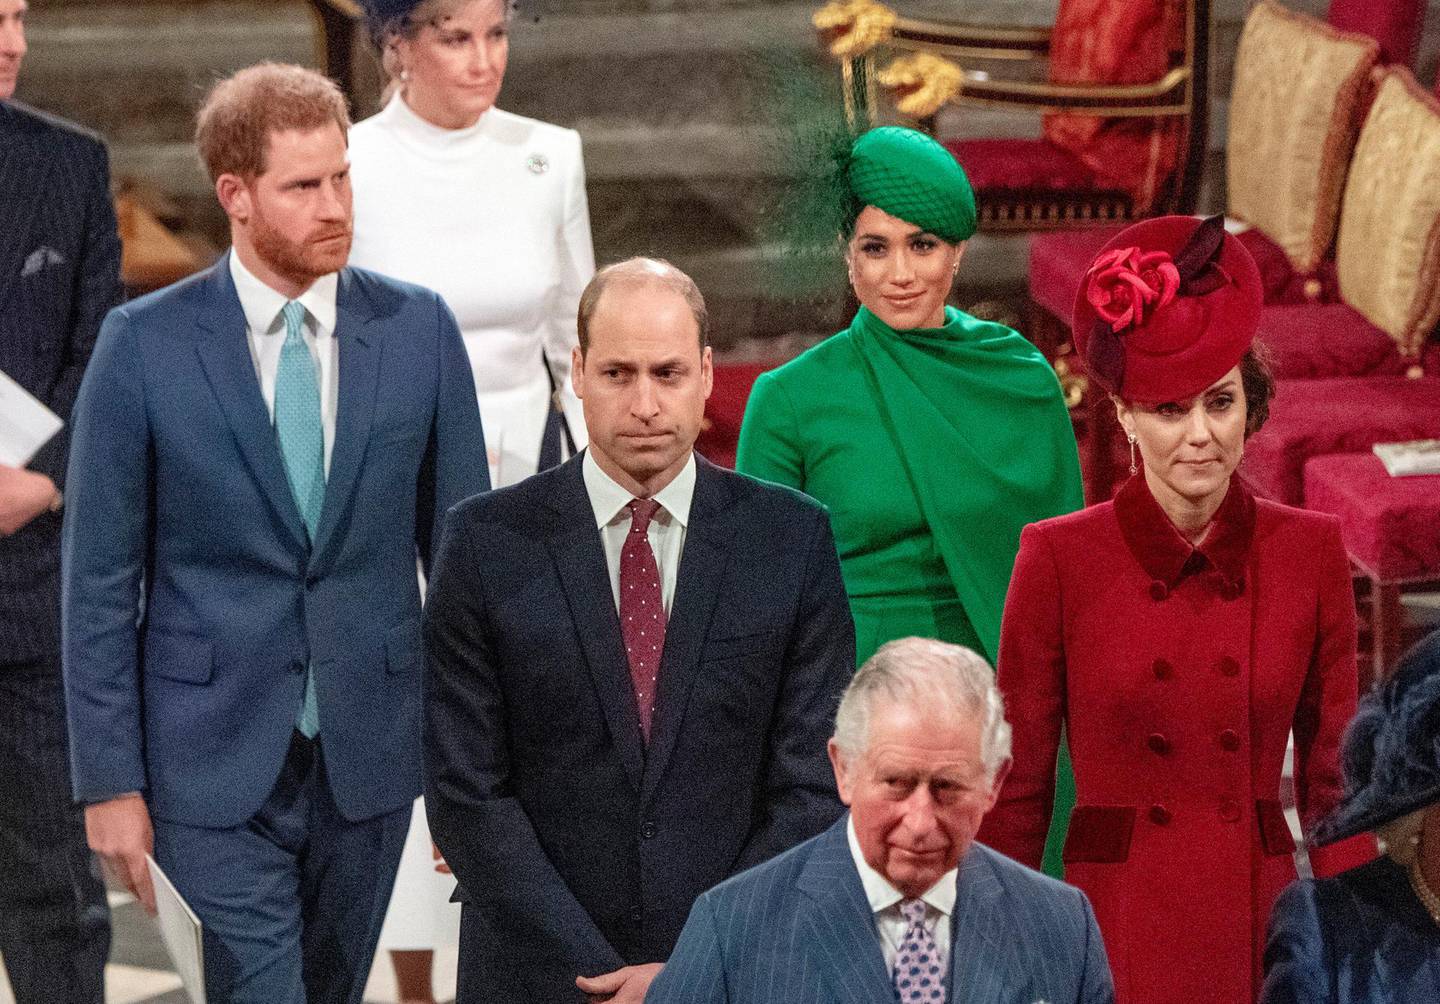 FILE - In this file photo dated Monday March 9, 2020, members of Britain's royal family, with Prince Charles in foreground, followed by Prince William with Kate Duchess of Cambridge, and Prince Harry with Meghan Duchess of Sussex, as they leave the annual Commonwealth Service at Westminster Abbey in London. Britain's Queen Elizabeth II and other members of the royal family along with various government leaders and guests attended the annual Commonwealth Day service, the largest annual inter-faith gathering in the United Kingdom.  The princeâ€™s Clarence House office reported on Wednesday, March 25, 2020 that the 71-year-old Prince Charles is showing mild symptoms of COVID-19 and is self-isolating at a royal estate in Scotland, also saying his wife Camilla has tested negative. (Phil Harris / FILE via AP)